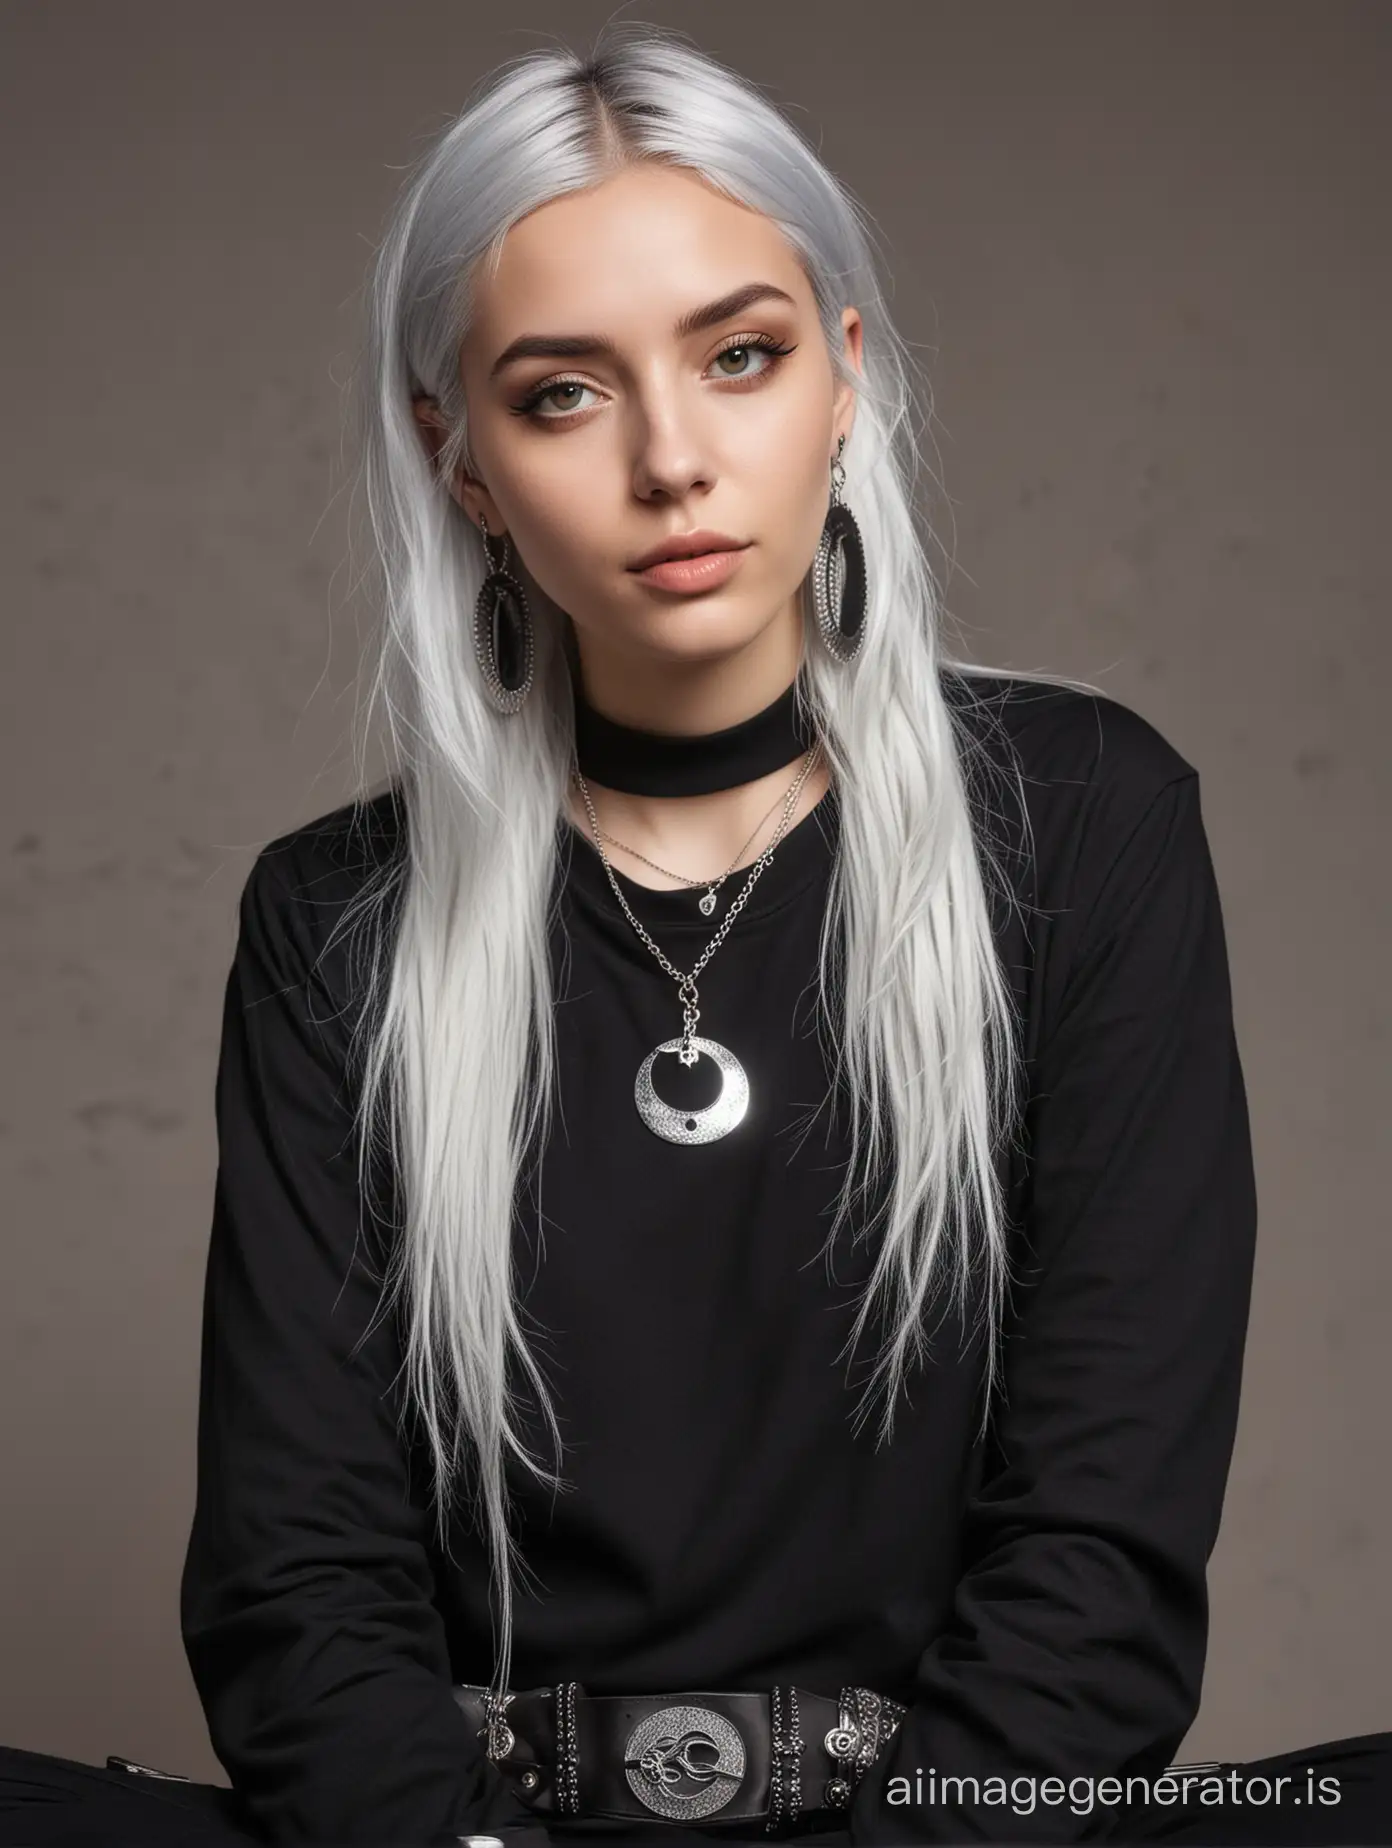 A young woman with grey dyed hair, fair skin, deep brown eyes, wears contact lenses, wears dark academia clothes, silver necklaces with a yin yang and an half moon necklace, a pair of silver feather earrings and a pair of doc martens black boots